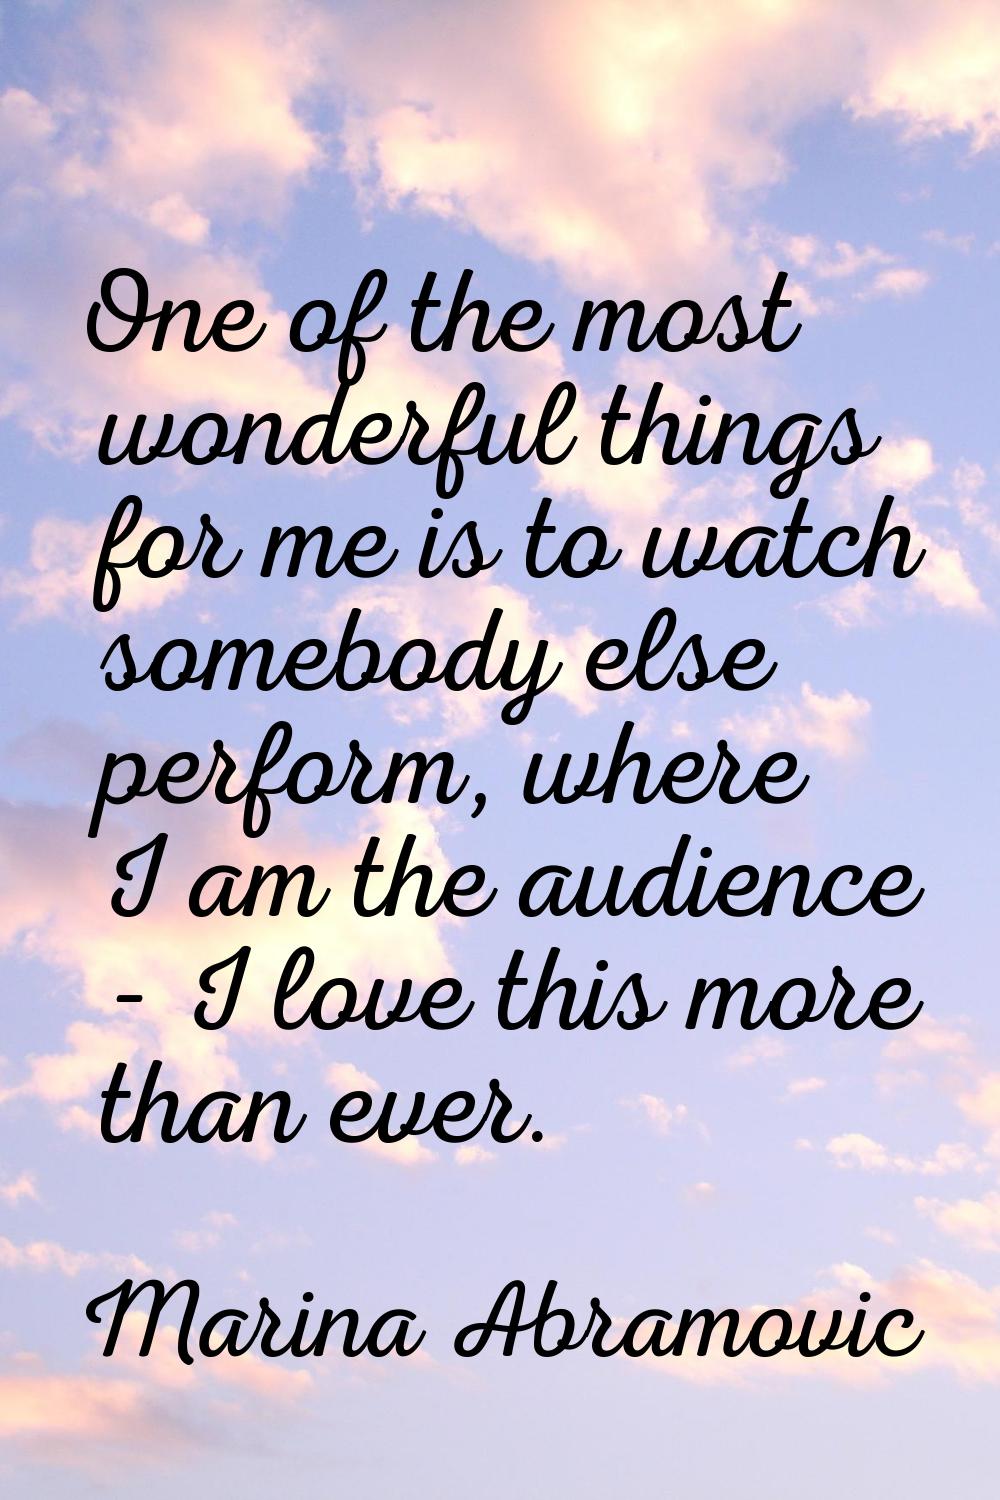 One of the most wonderful things for me is to watch somebody else perform, where I am the audience 